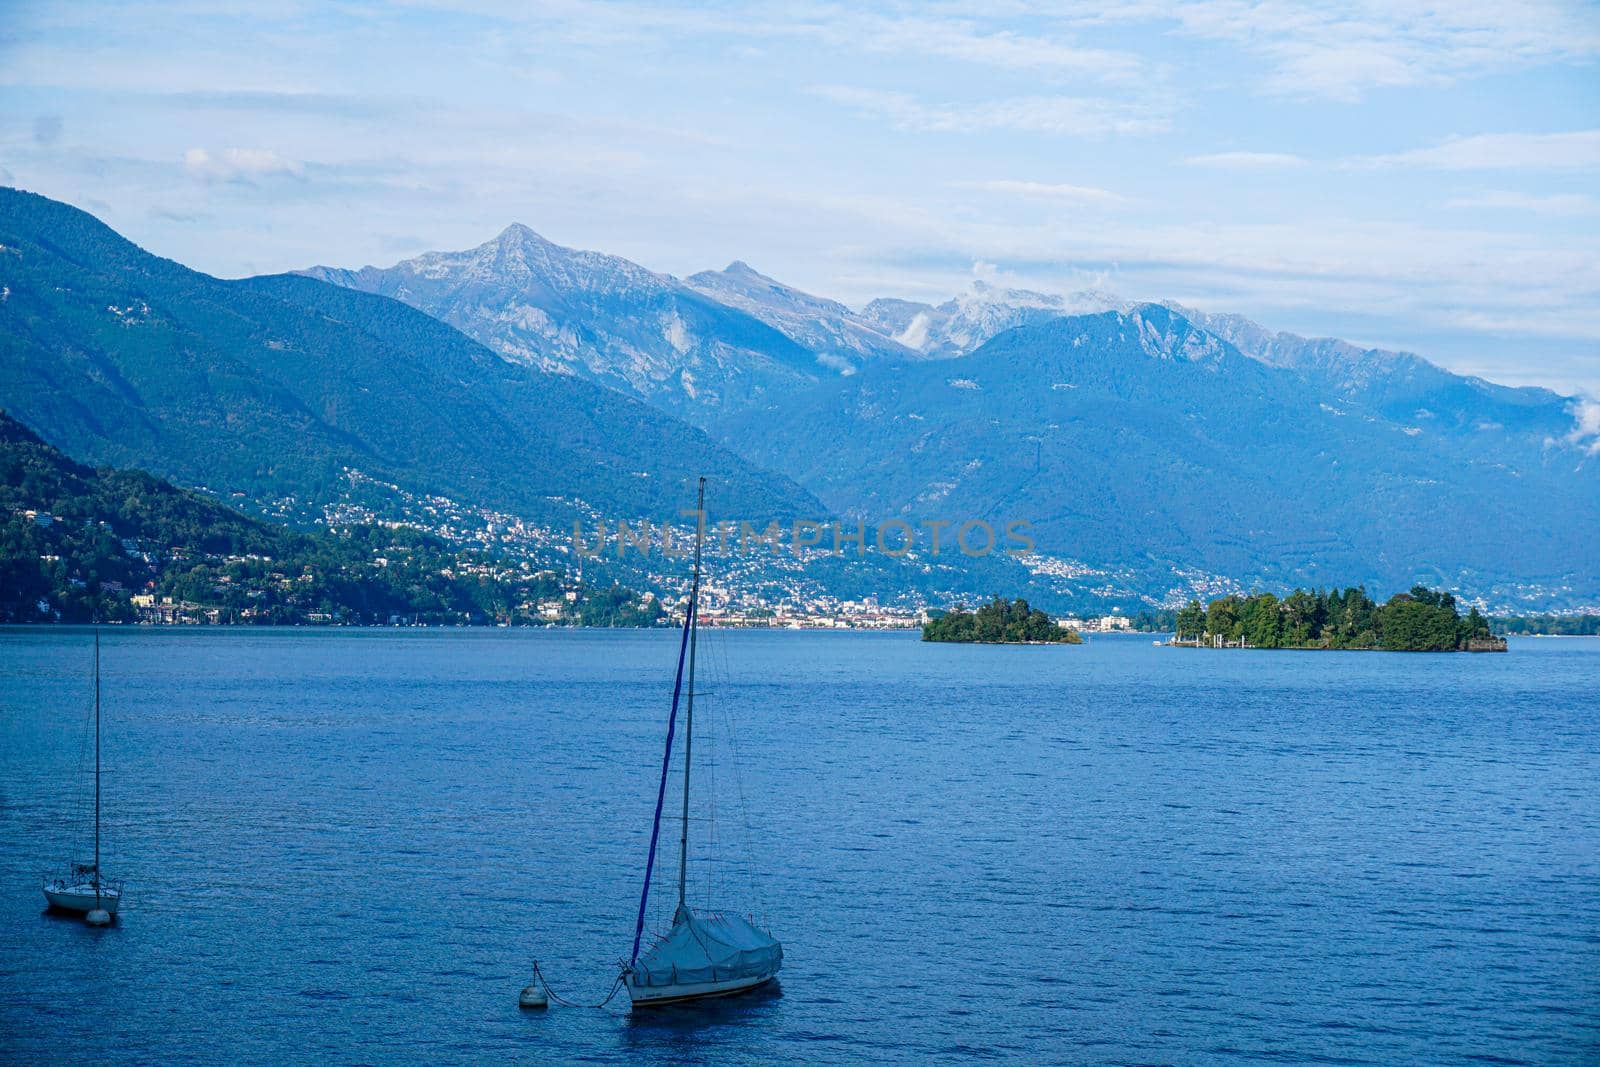 Sail boats in front of impressing mountain range on the Lago Maggiore, Switzerland by pisces2386